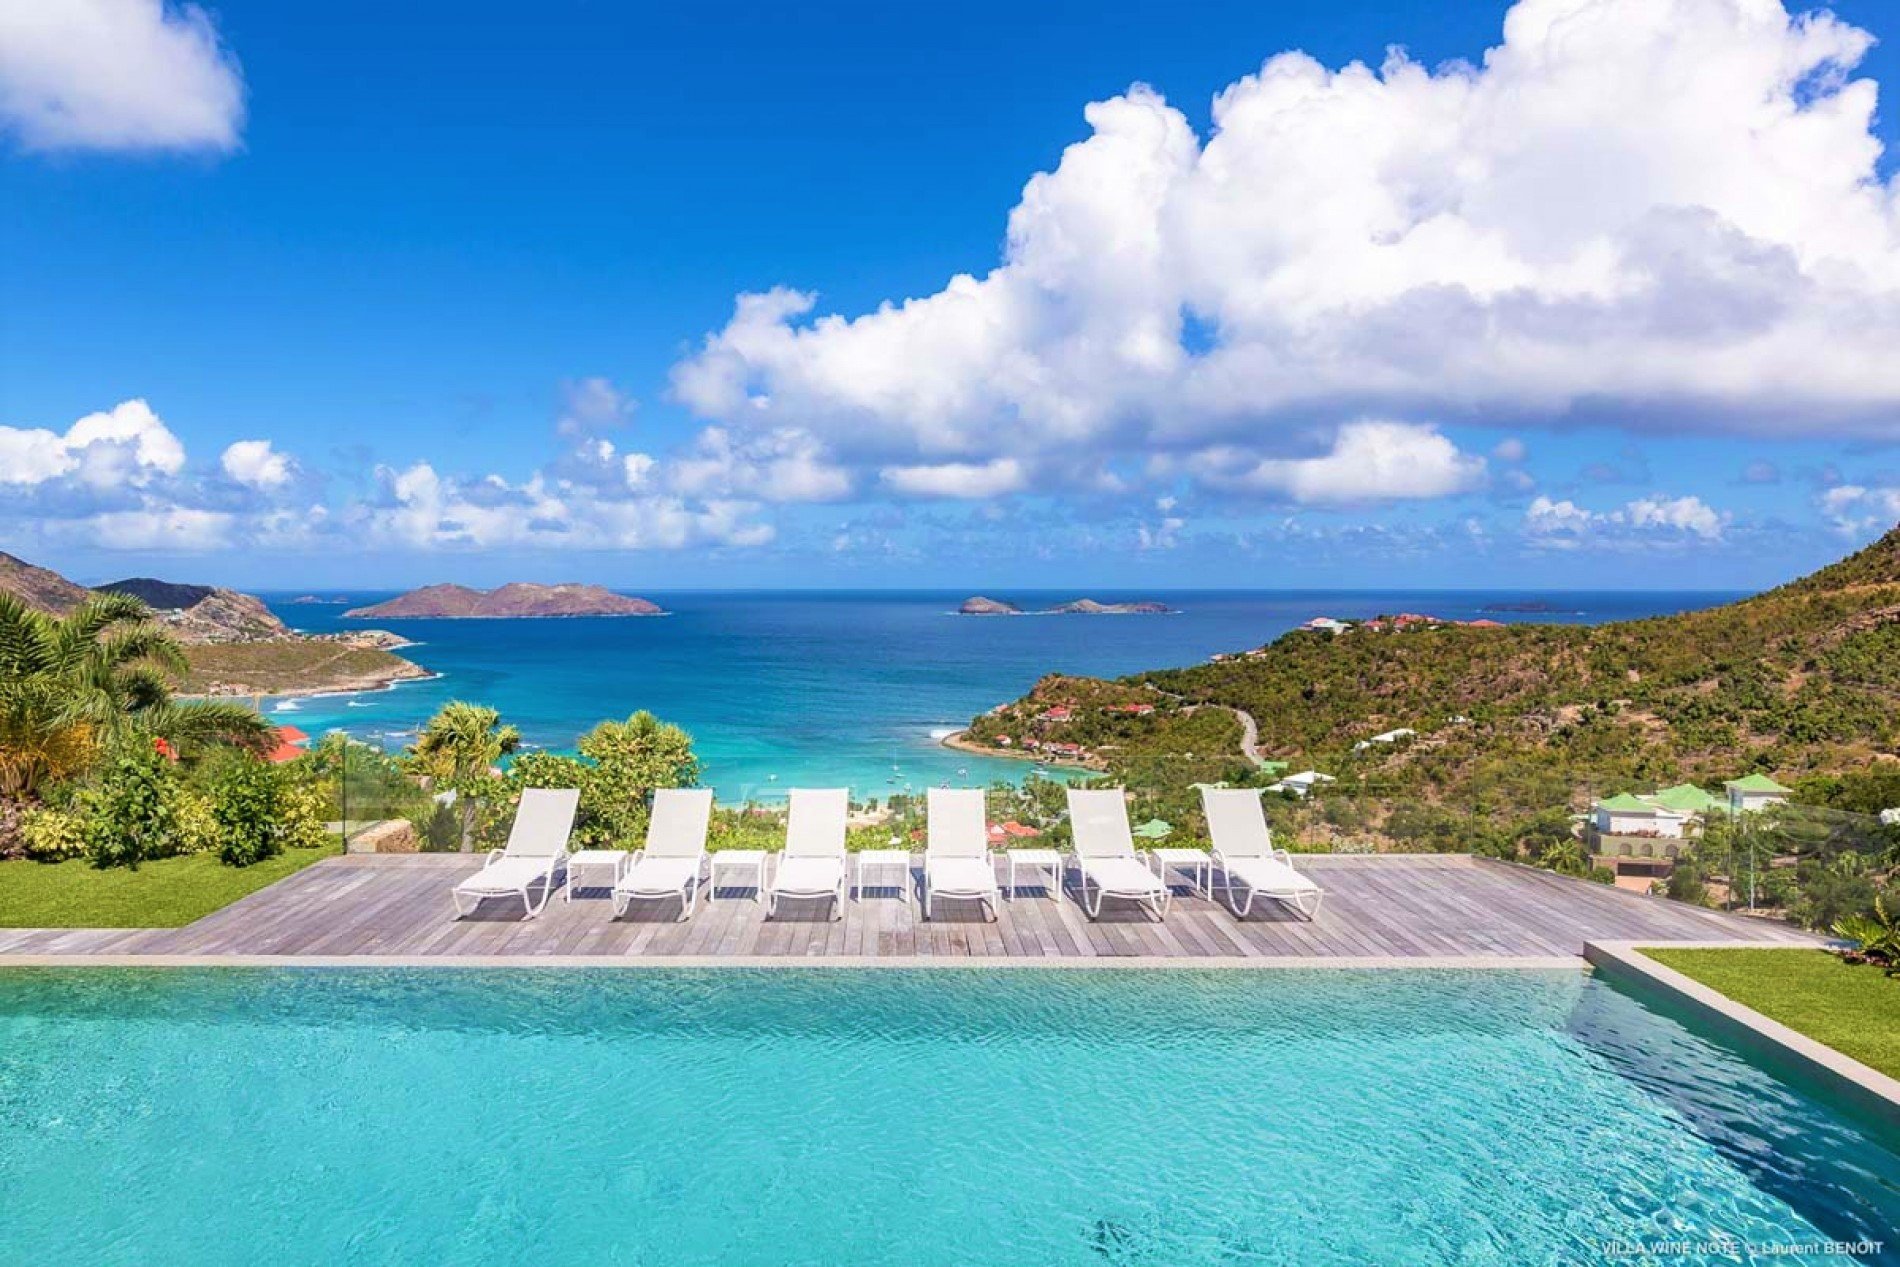 Best Hotels in St Barts - A No-Nonsense Guide to St Barts Resorts & Villas